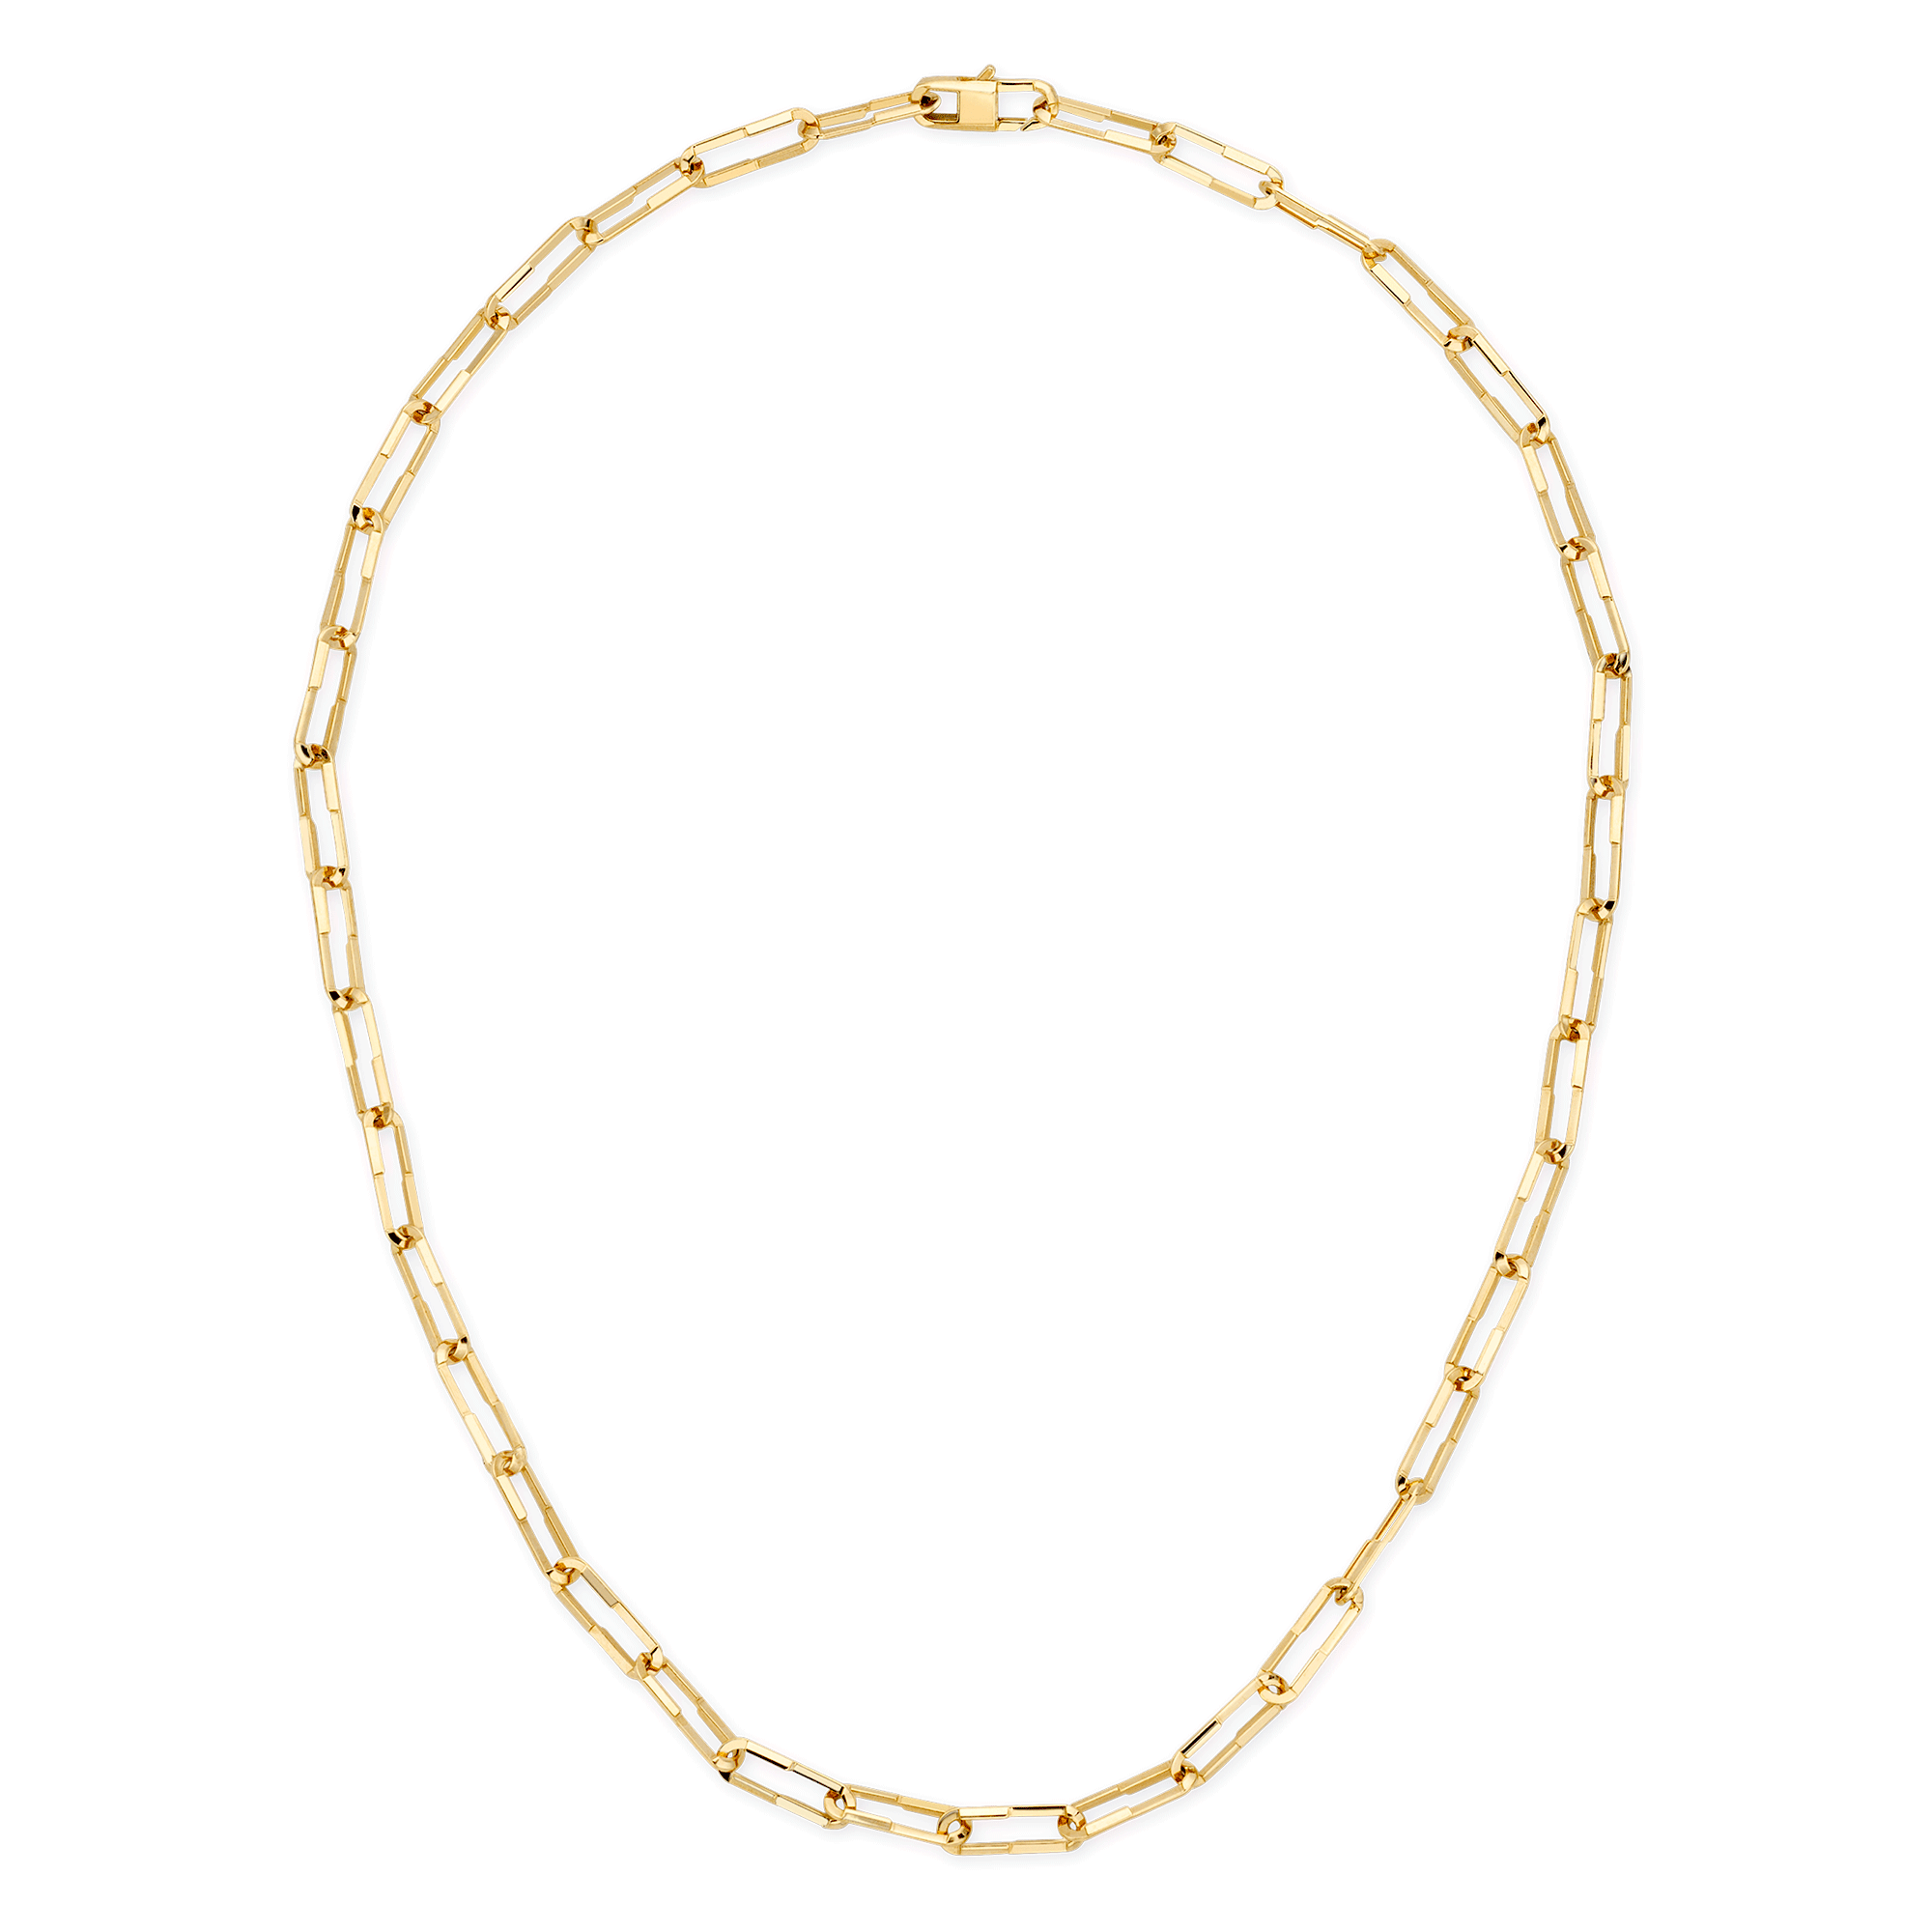 Gucci Link to Love 18ct Yellow Gold Paperchain Necklace